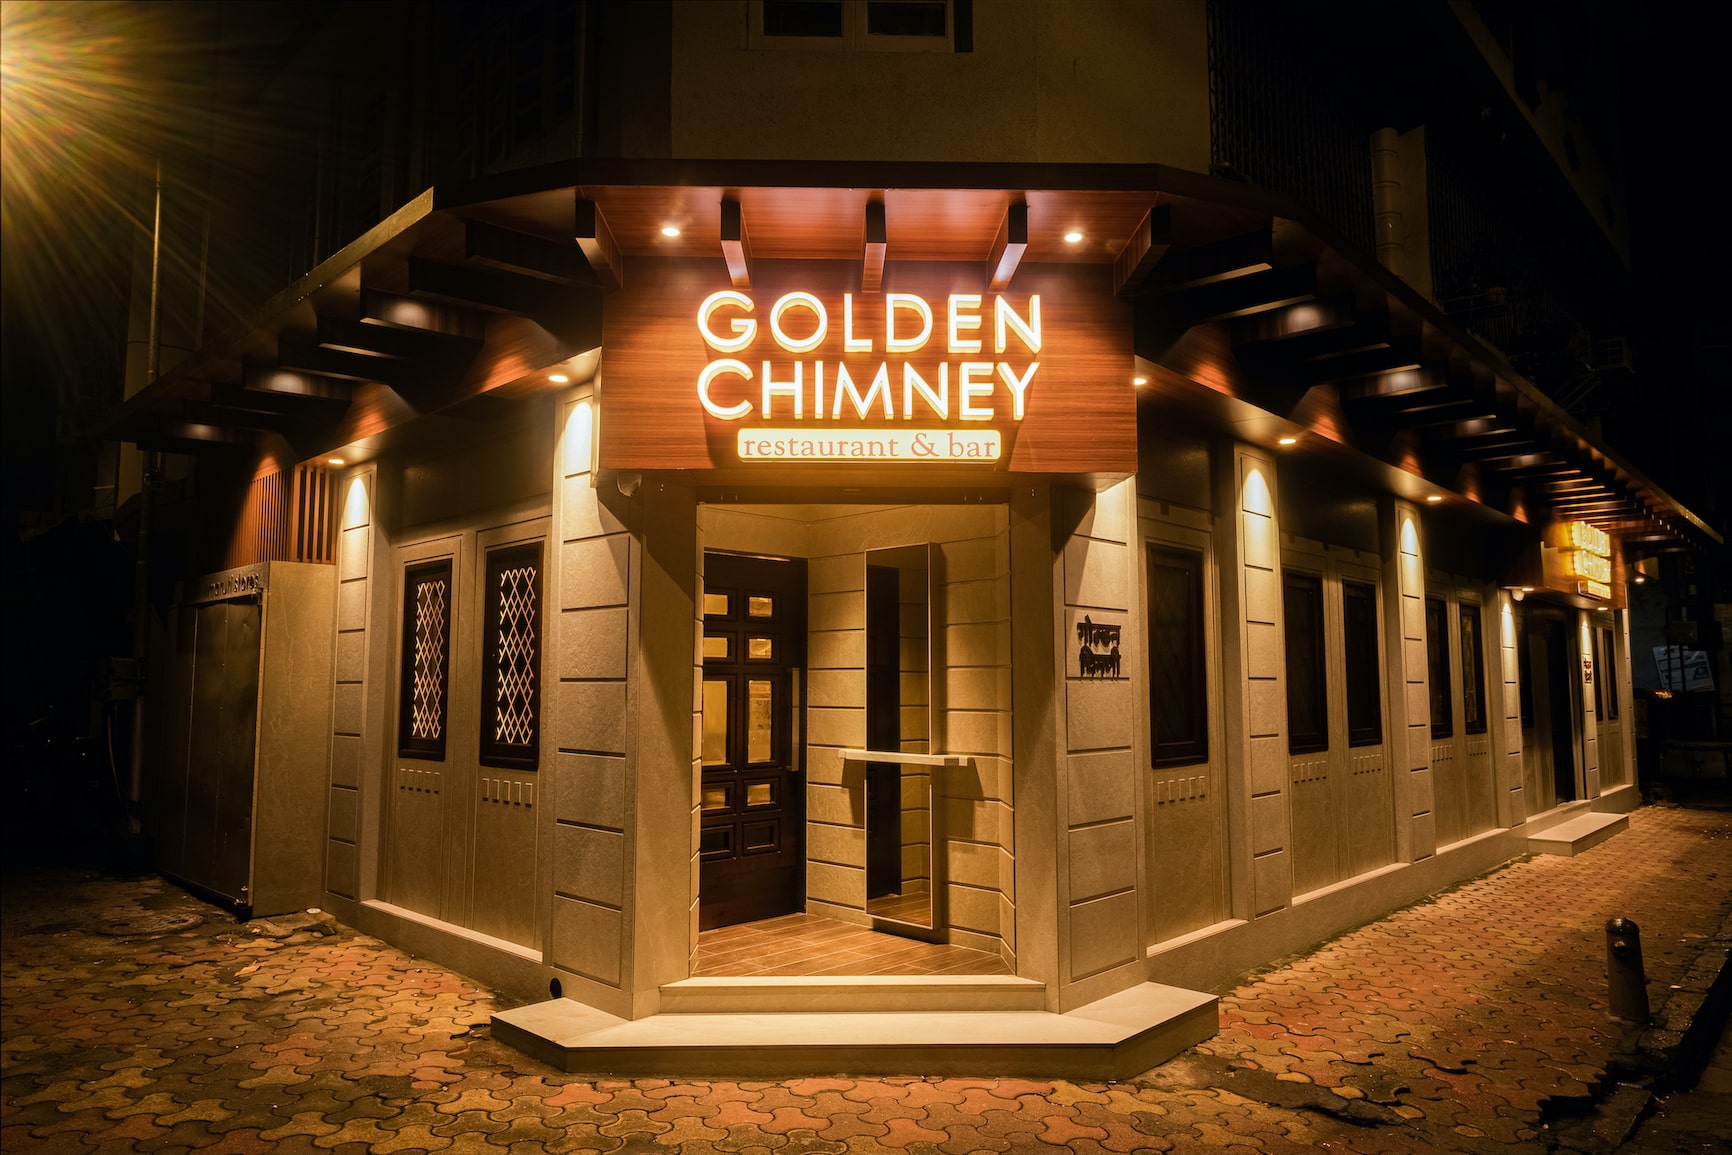 Head To The Golden Chimney Restaurant With Your Family For A Lip-Smacking Mother's Day Meal